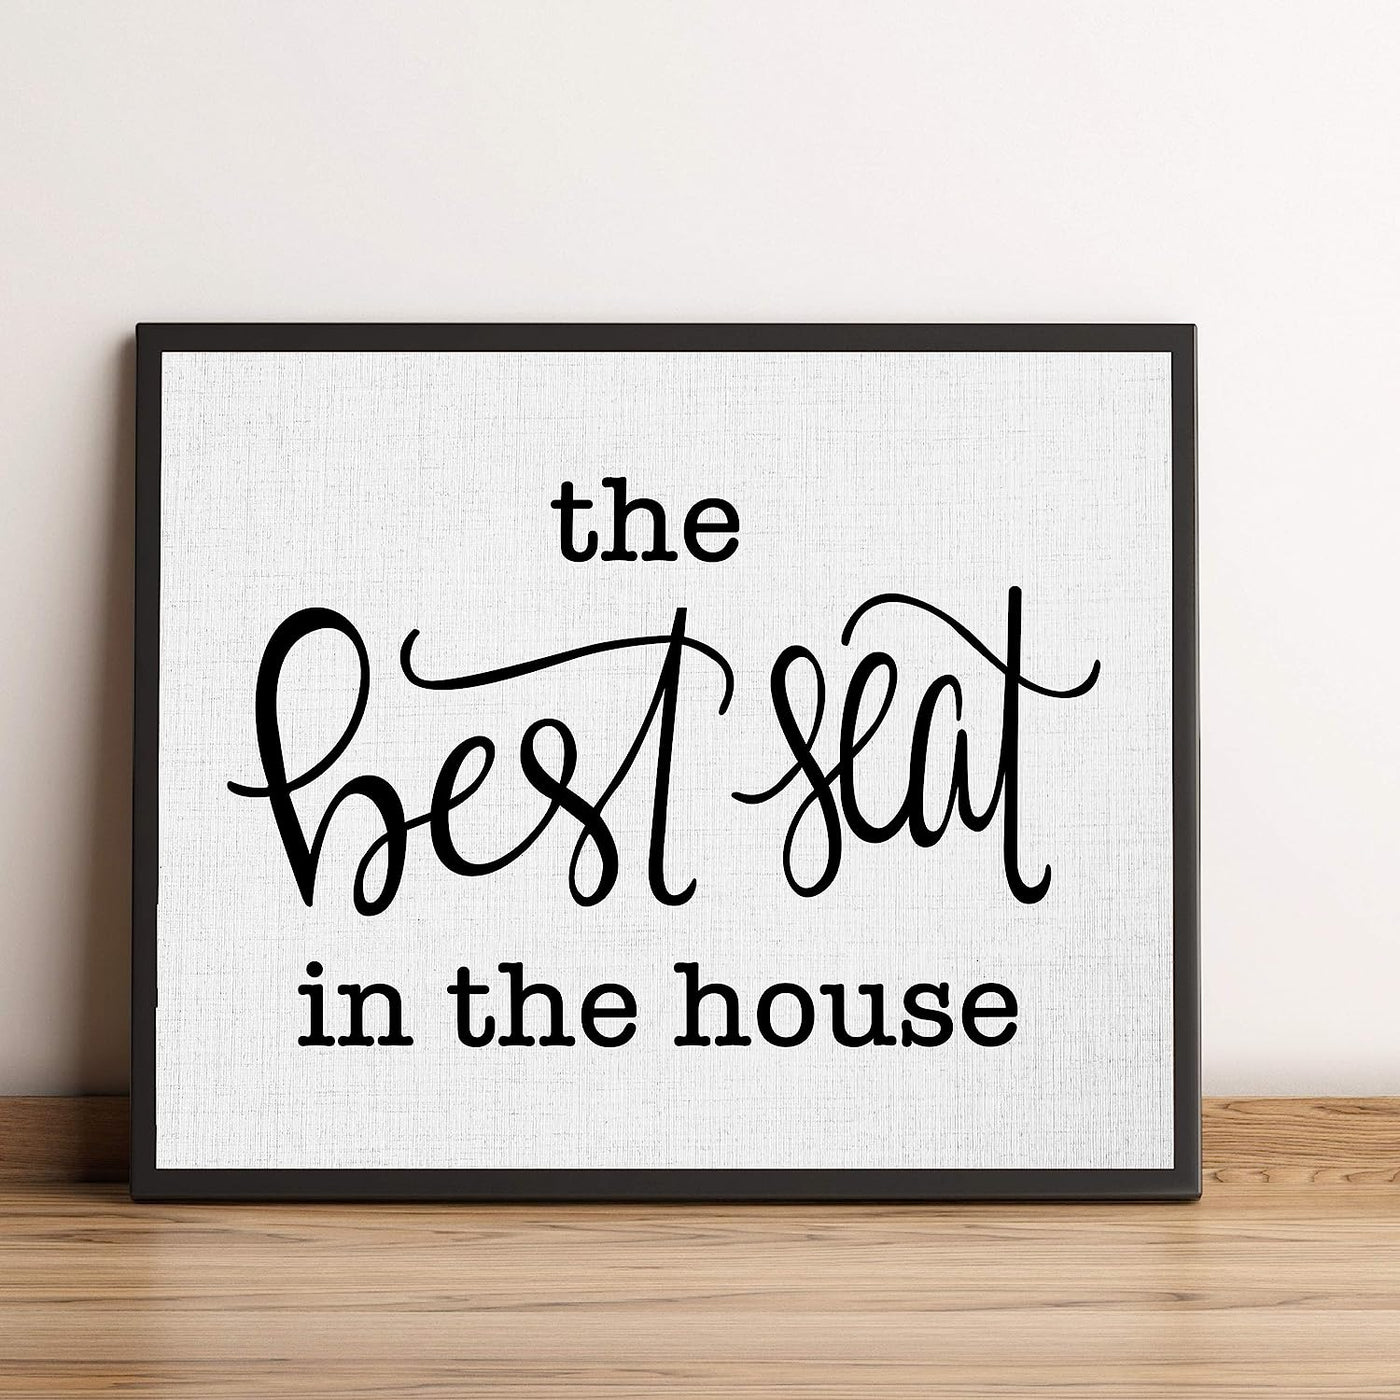 The Best Seat in the House Funny Bathroom Wall Art -10 x 8" Typographic Shabby Chic Poster Print-Ready to Frame. Humorous Home-Guest Bathroom-Farmhouse Decor. Perfect Country Sign for the Restroom!